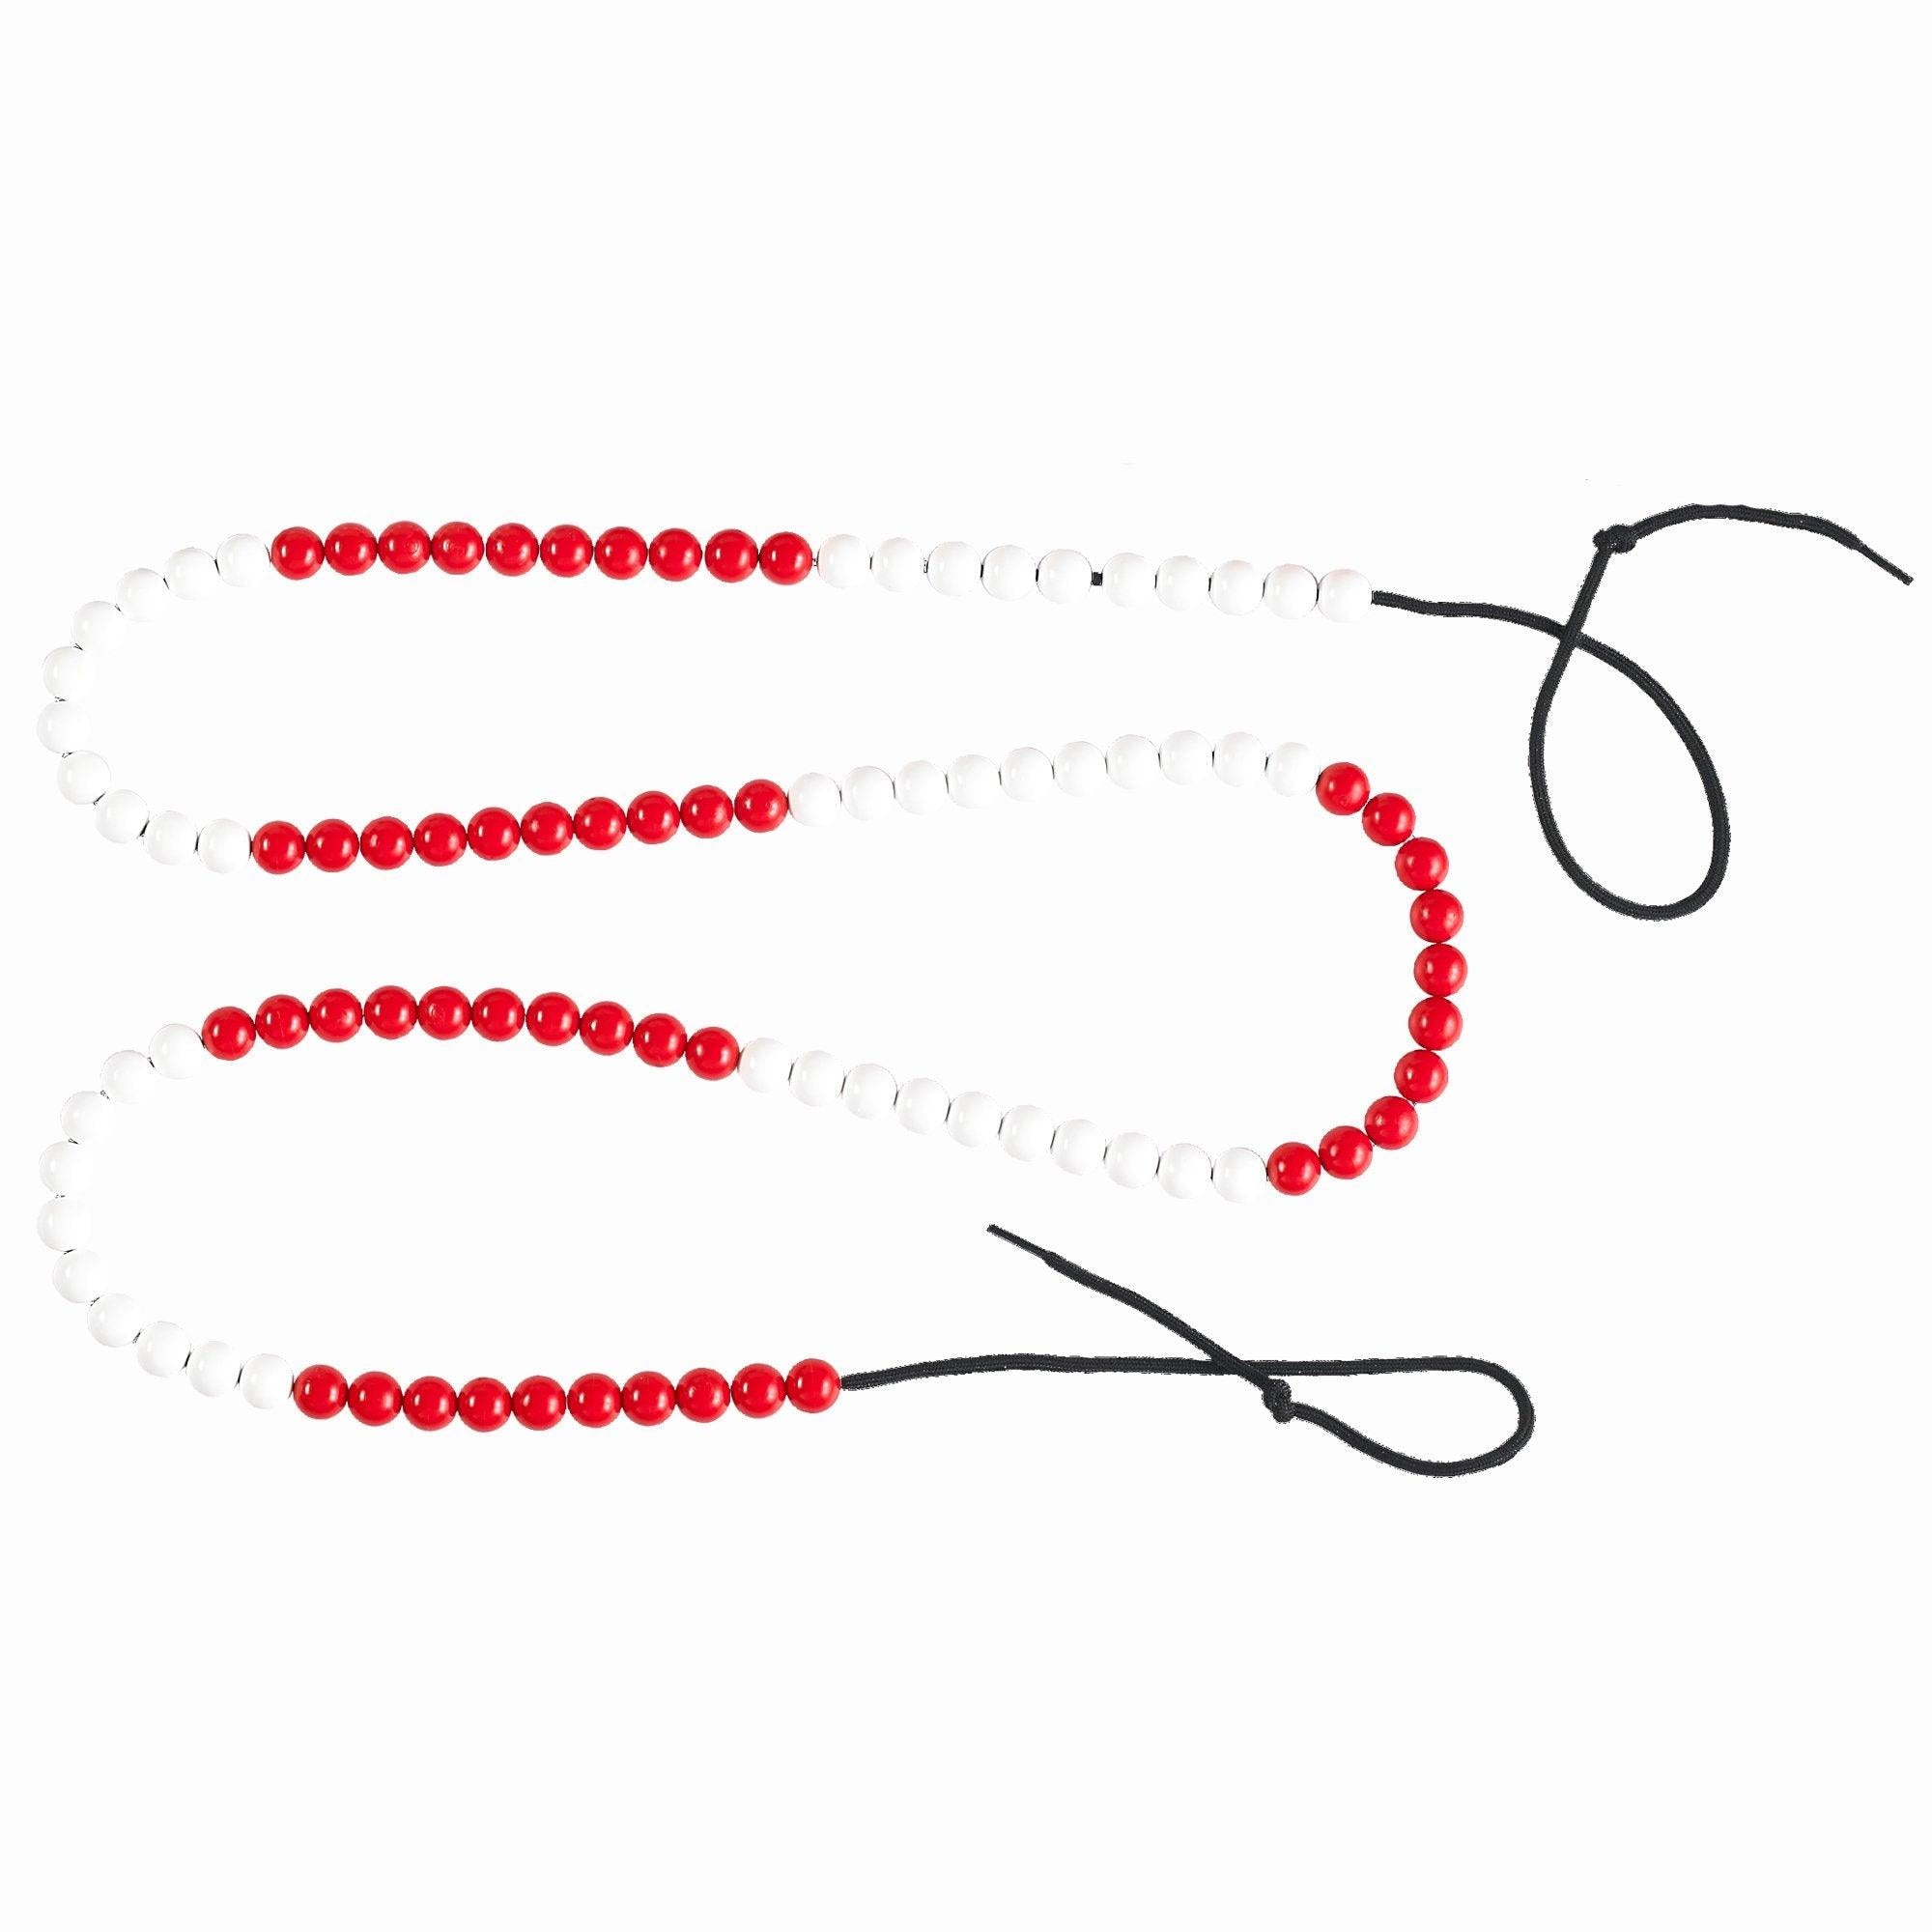 Student Beadstring 1-100: Set of 10